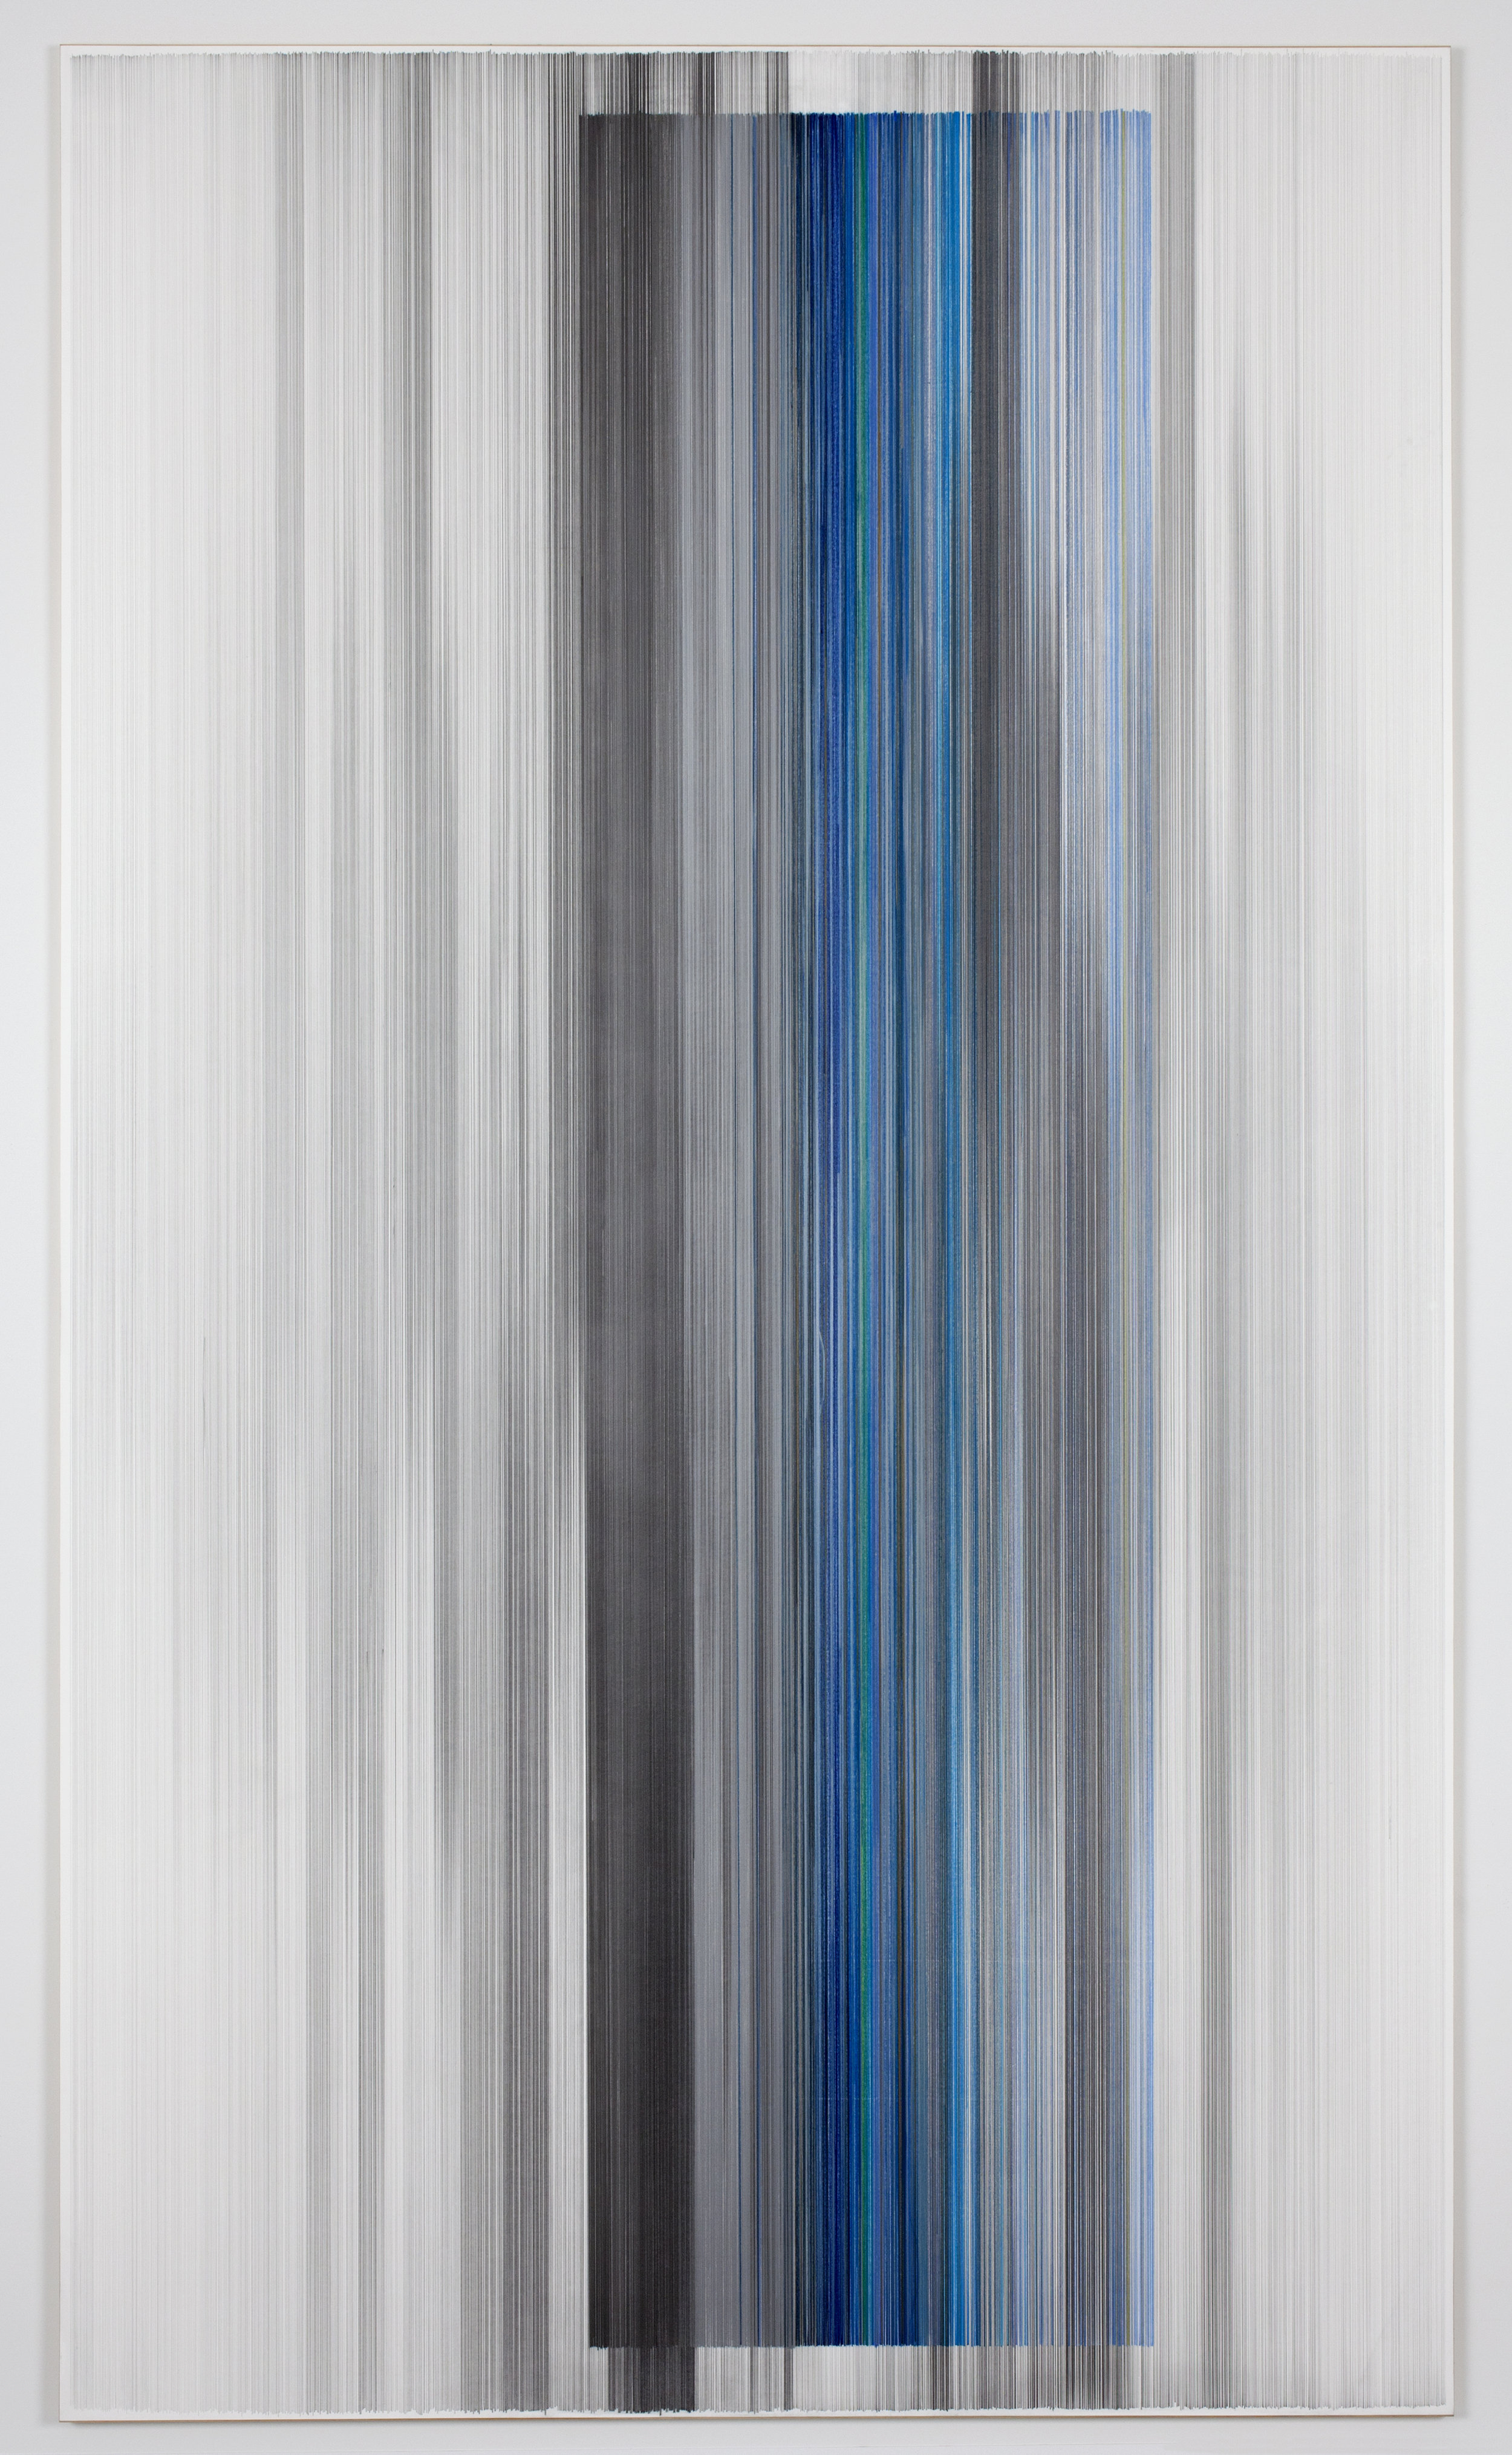    gravity is gravity   2016 graphite and colored pencil on mat board 102 x 59 inches 